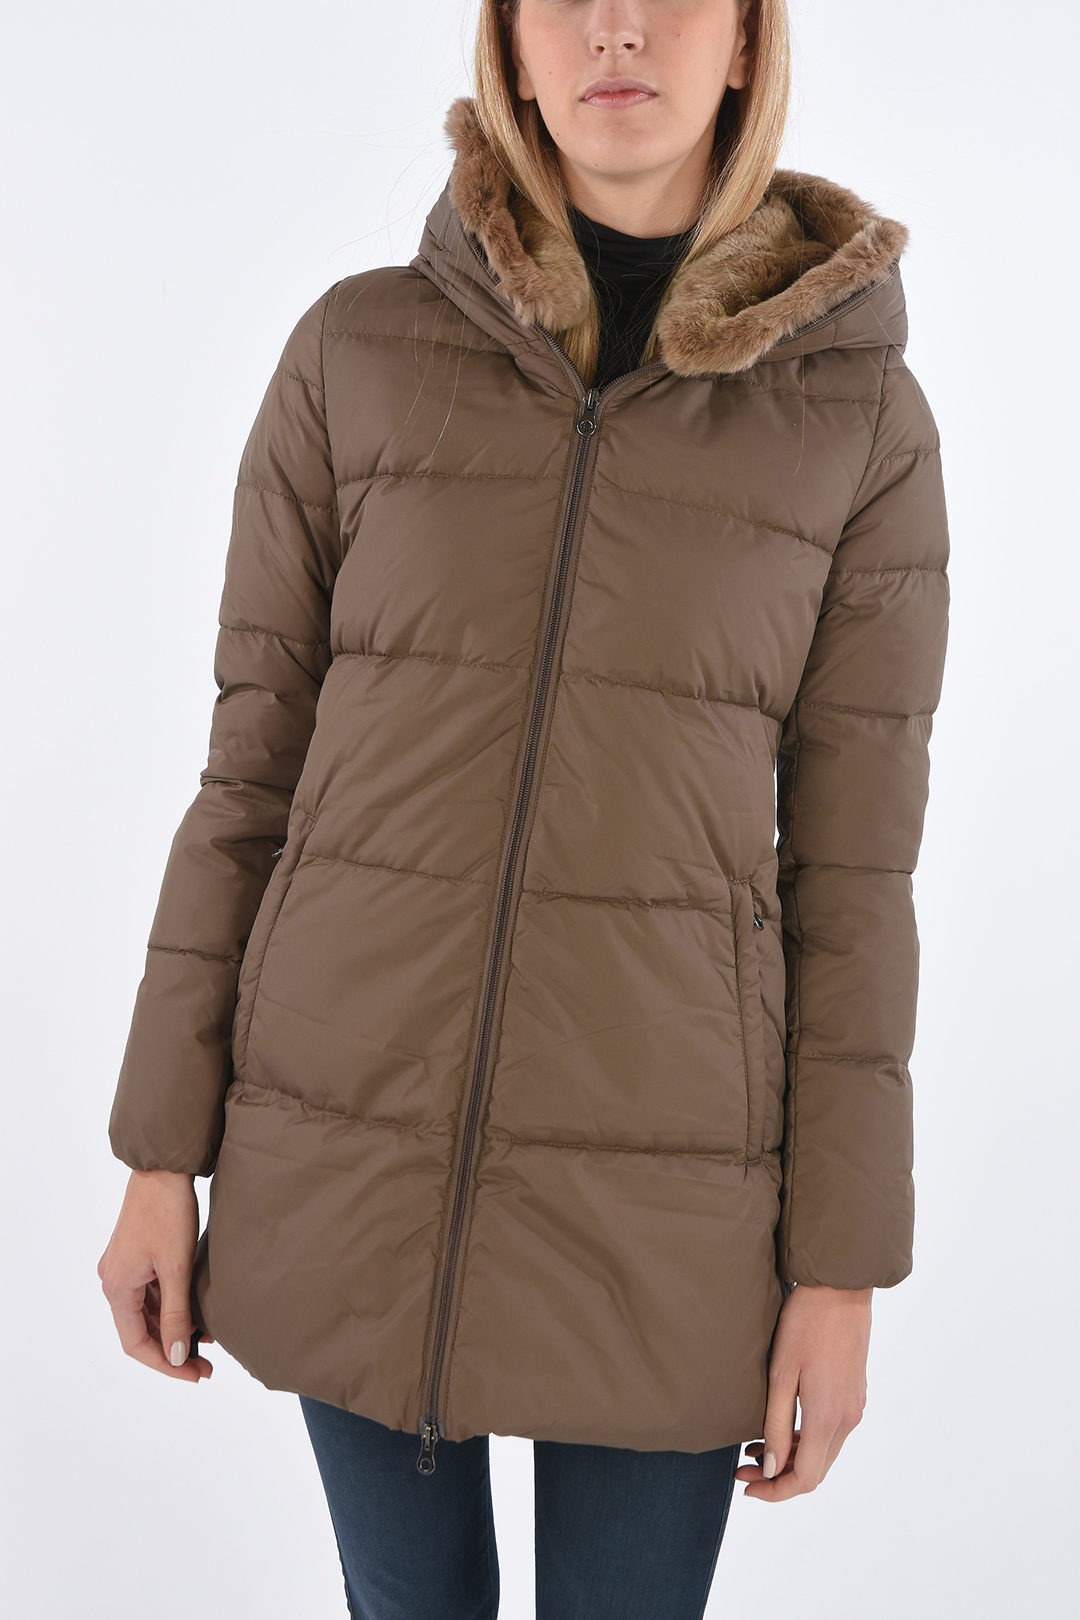 Duvetica removable real fur ARWEN down jacket with hood women